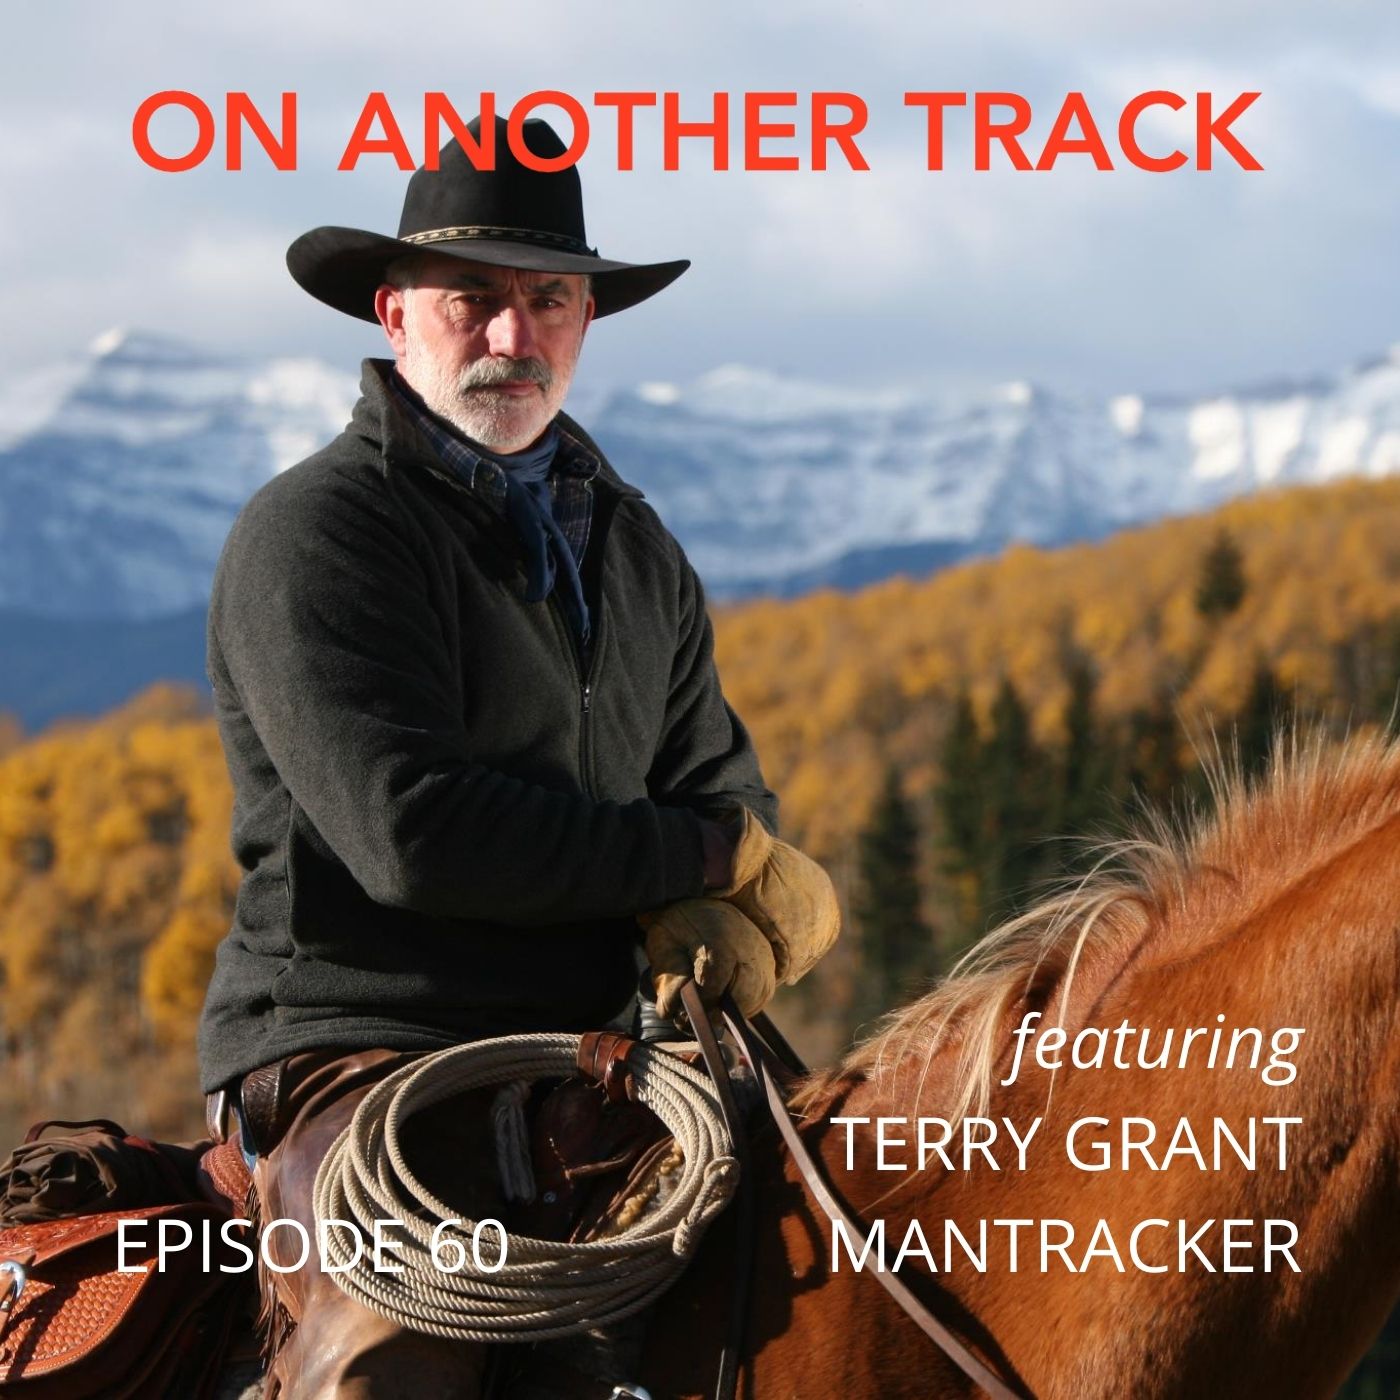 Terry Grant - The original “Mantracker”. He’s still alive and tracking! Image